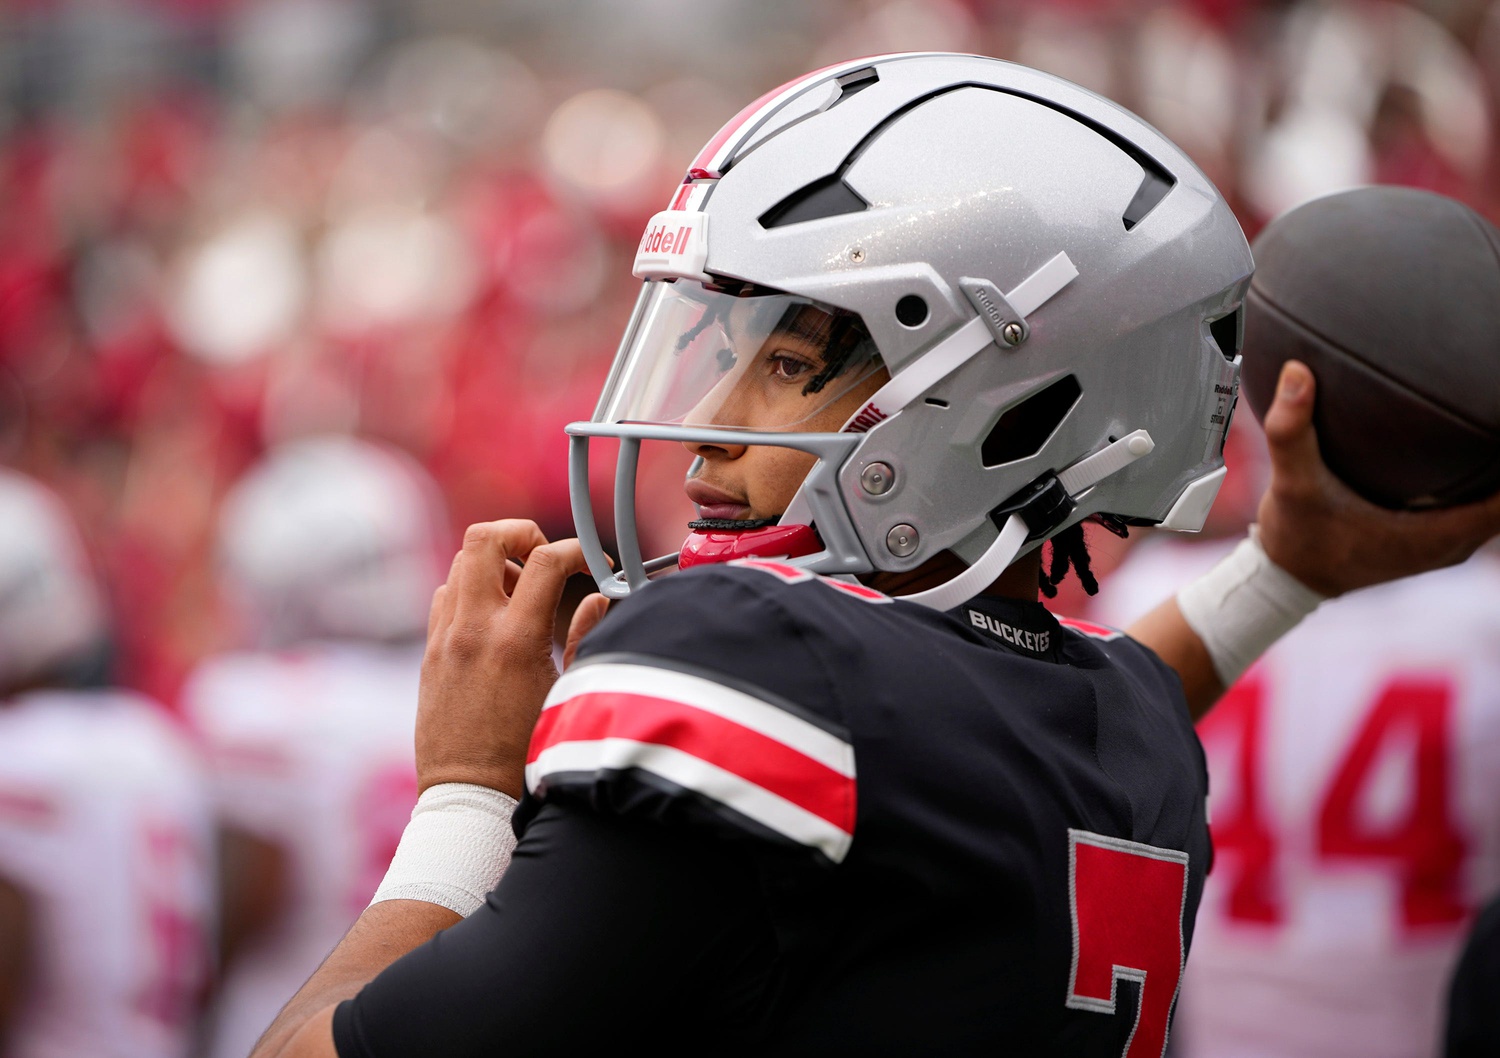 2023 NFL mock draft: Where do top QBs land in new 2-round projections?